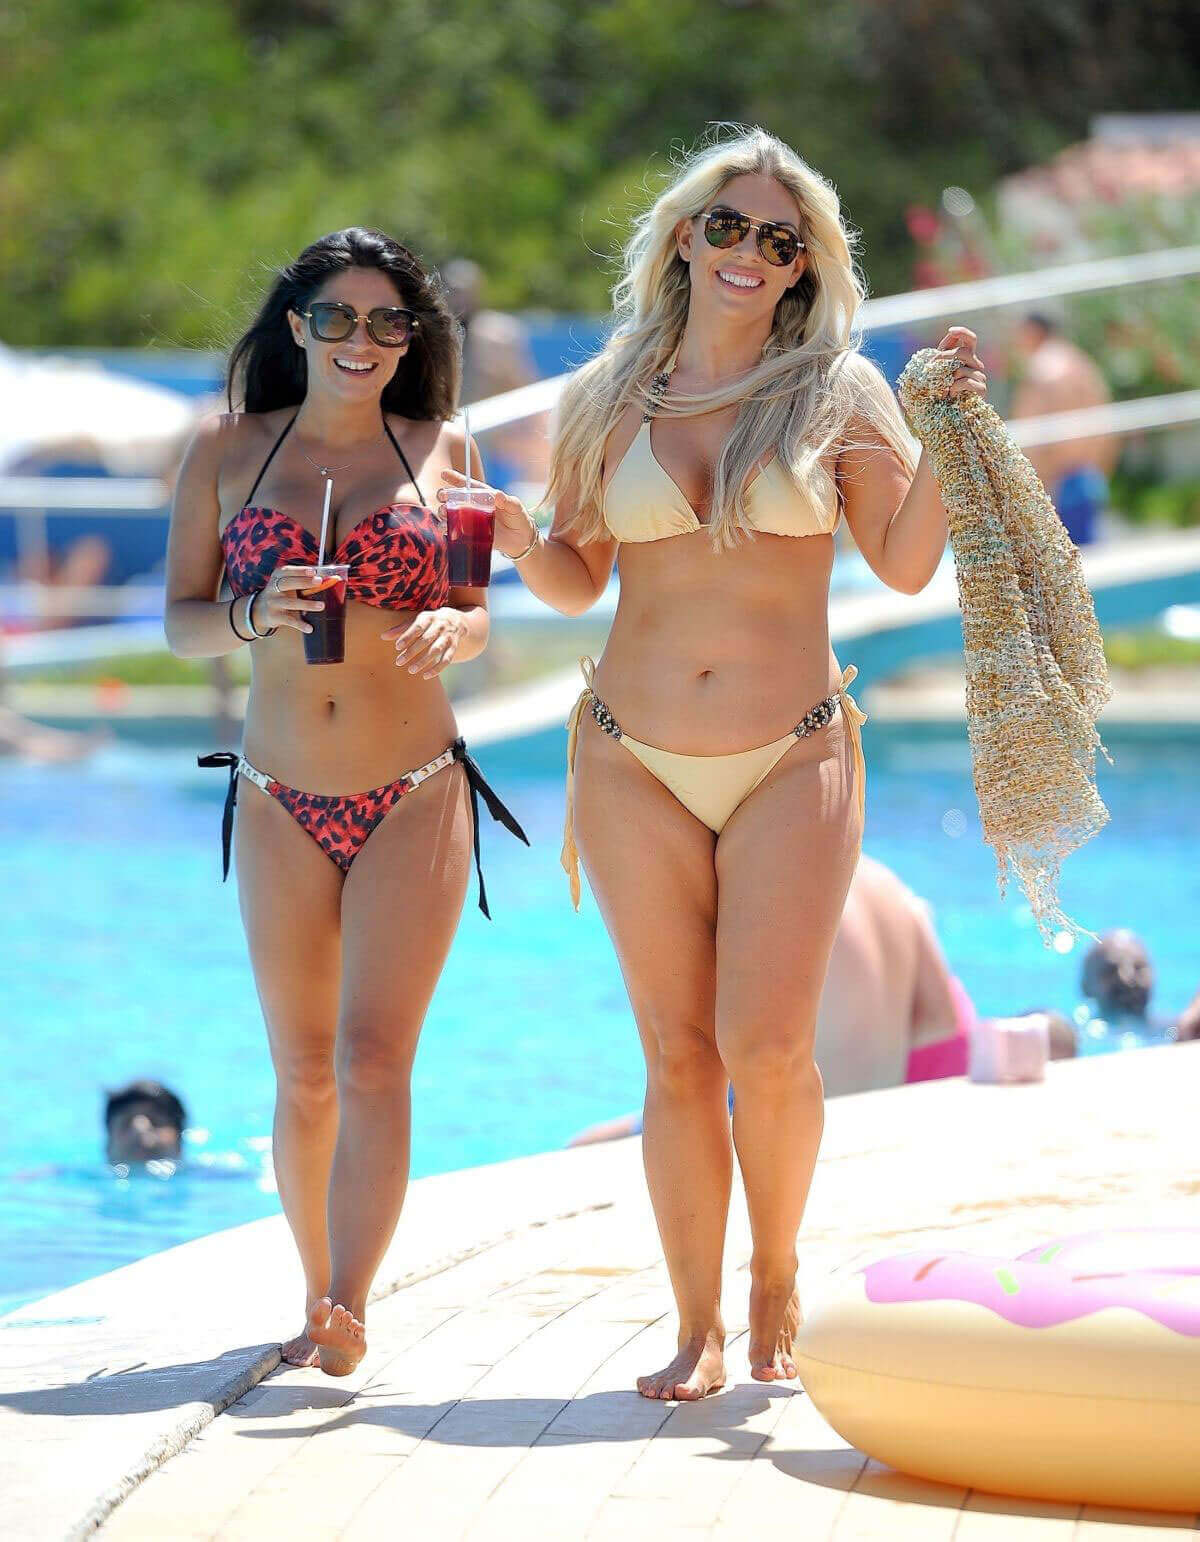 Casey Batchelor and Franke Essex Stills in Bikinis at a Pool in Spain